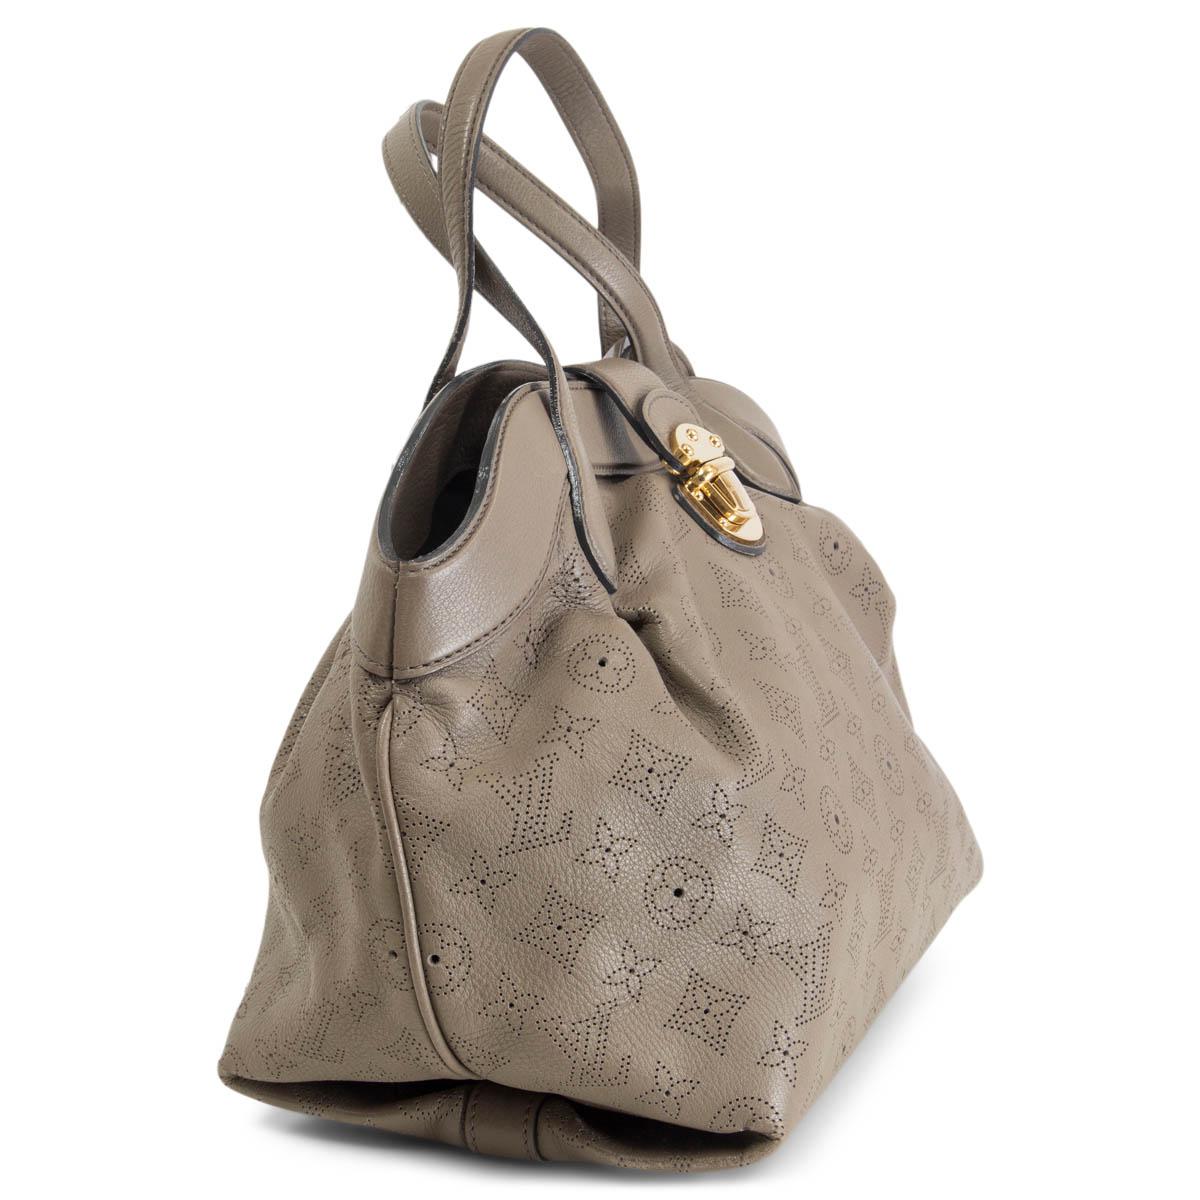 100% authentic Louis Vuitton PM Cirrus Mahina Handbag in taupe perforated Monogram Mahina leather. The push lock closure opens to a black alcantara lined interior with one zip pocket against the back and two open pockets against the front. It